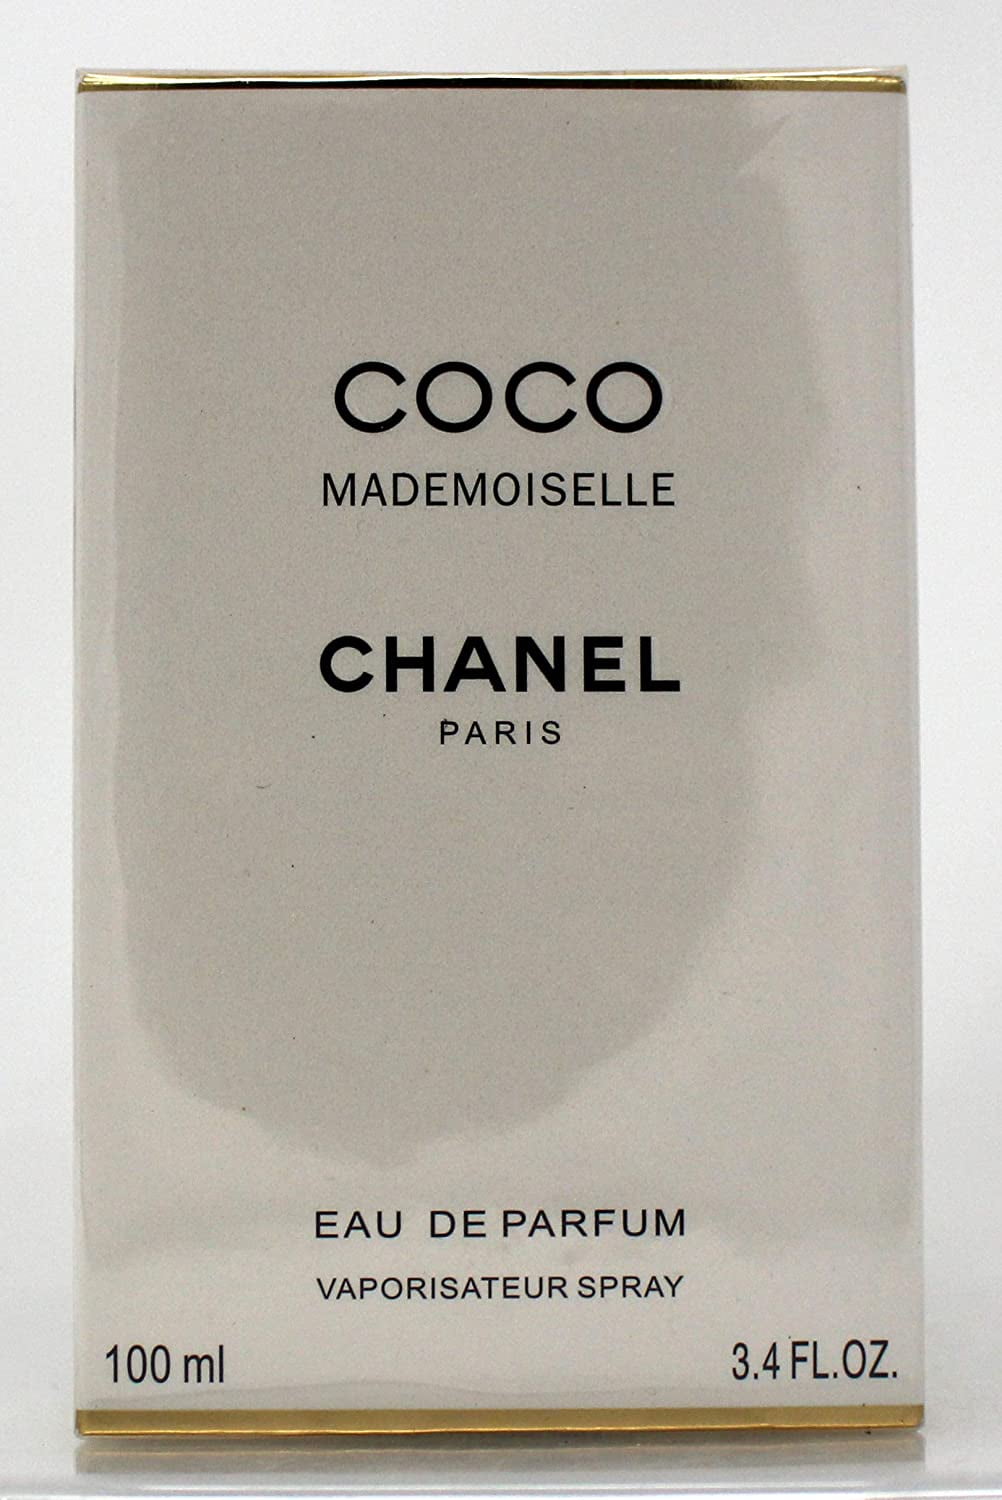 mademoiselle coco chanel 3.4